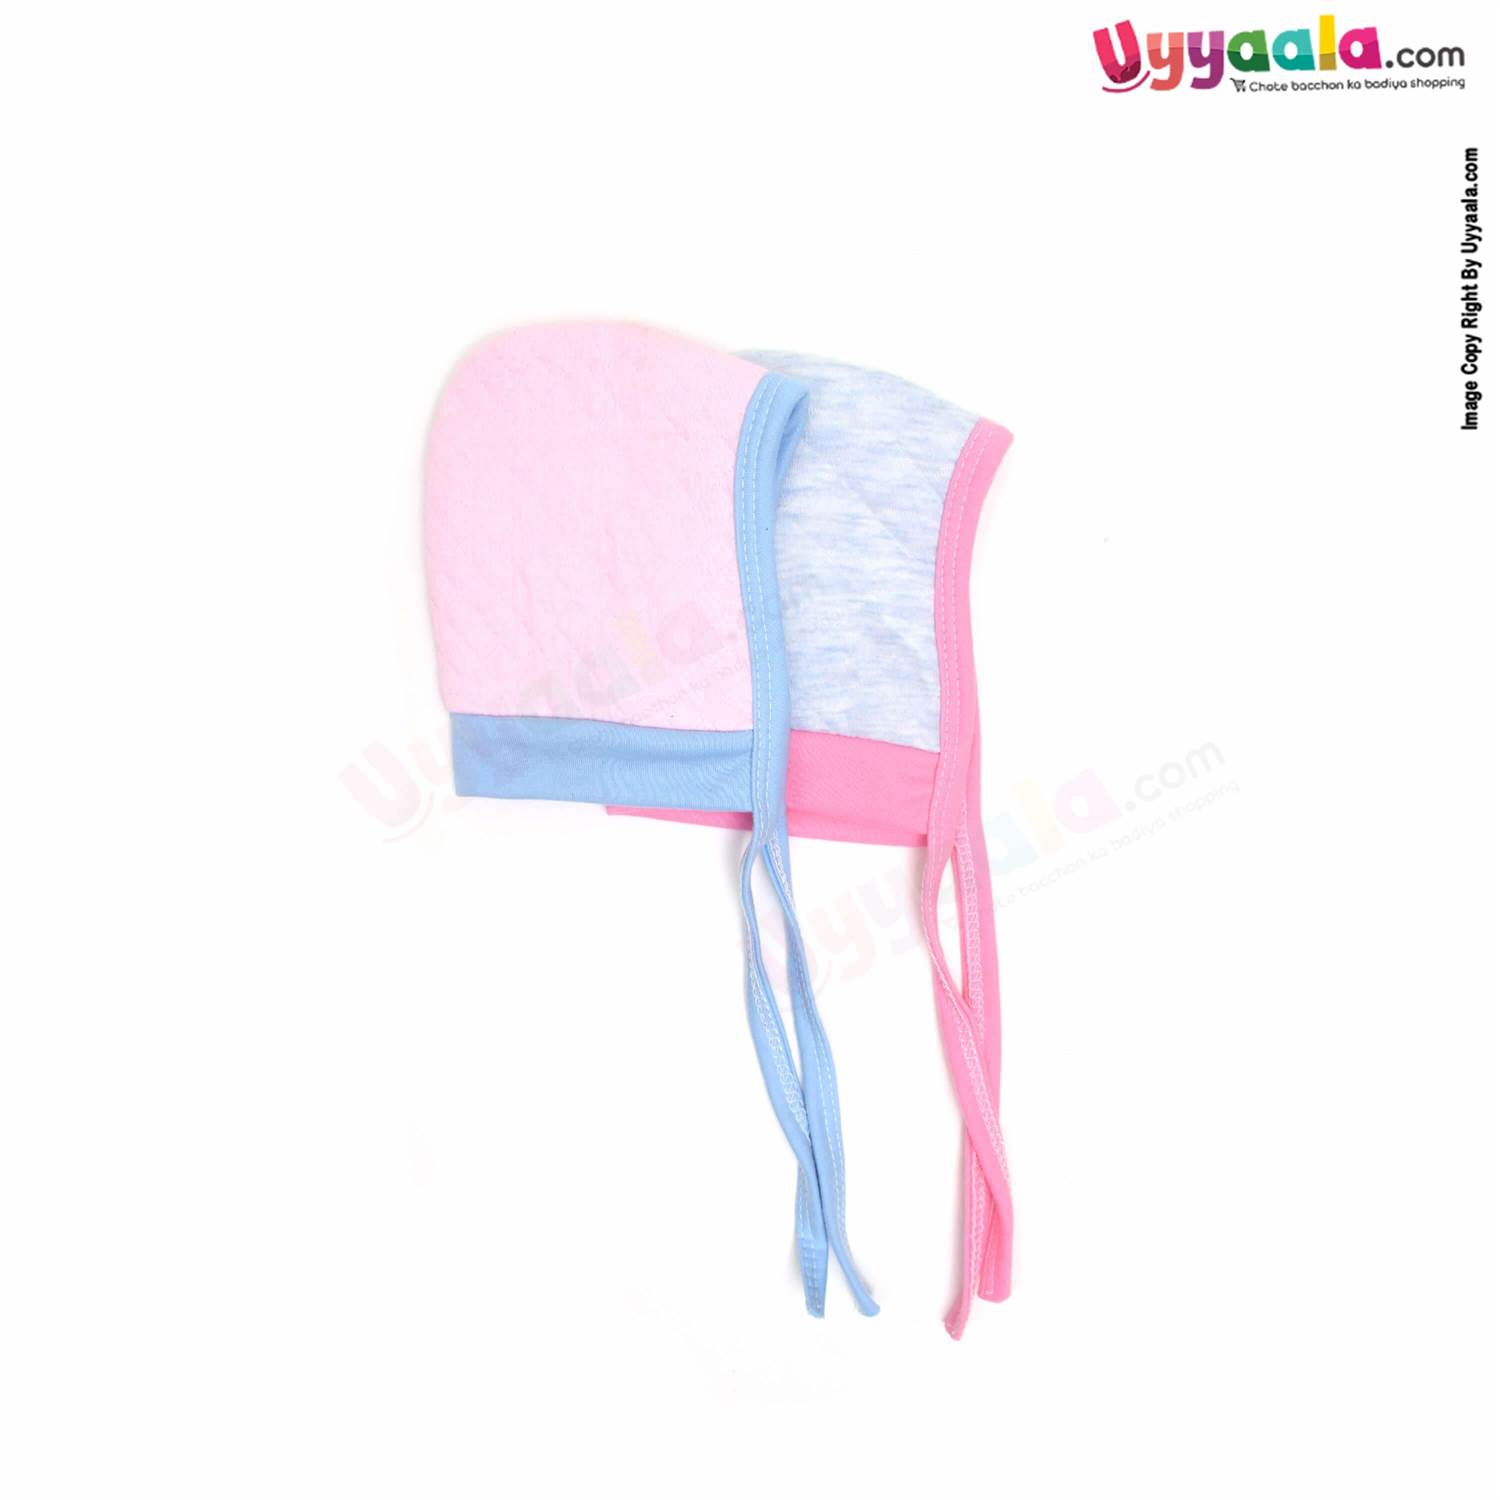 Side Tying Soft Hosiery Cotton Caps for Babies with Teddy Bear & Musical Note Patch Pack of 2, 0-6m age- Pink & Sky Blue